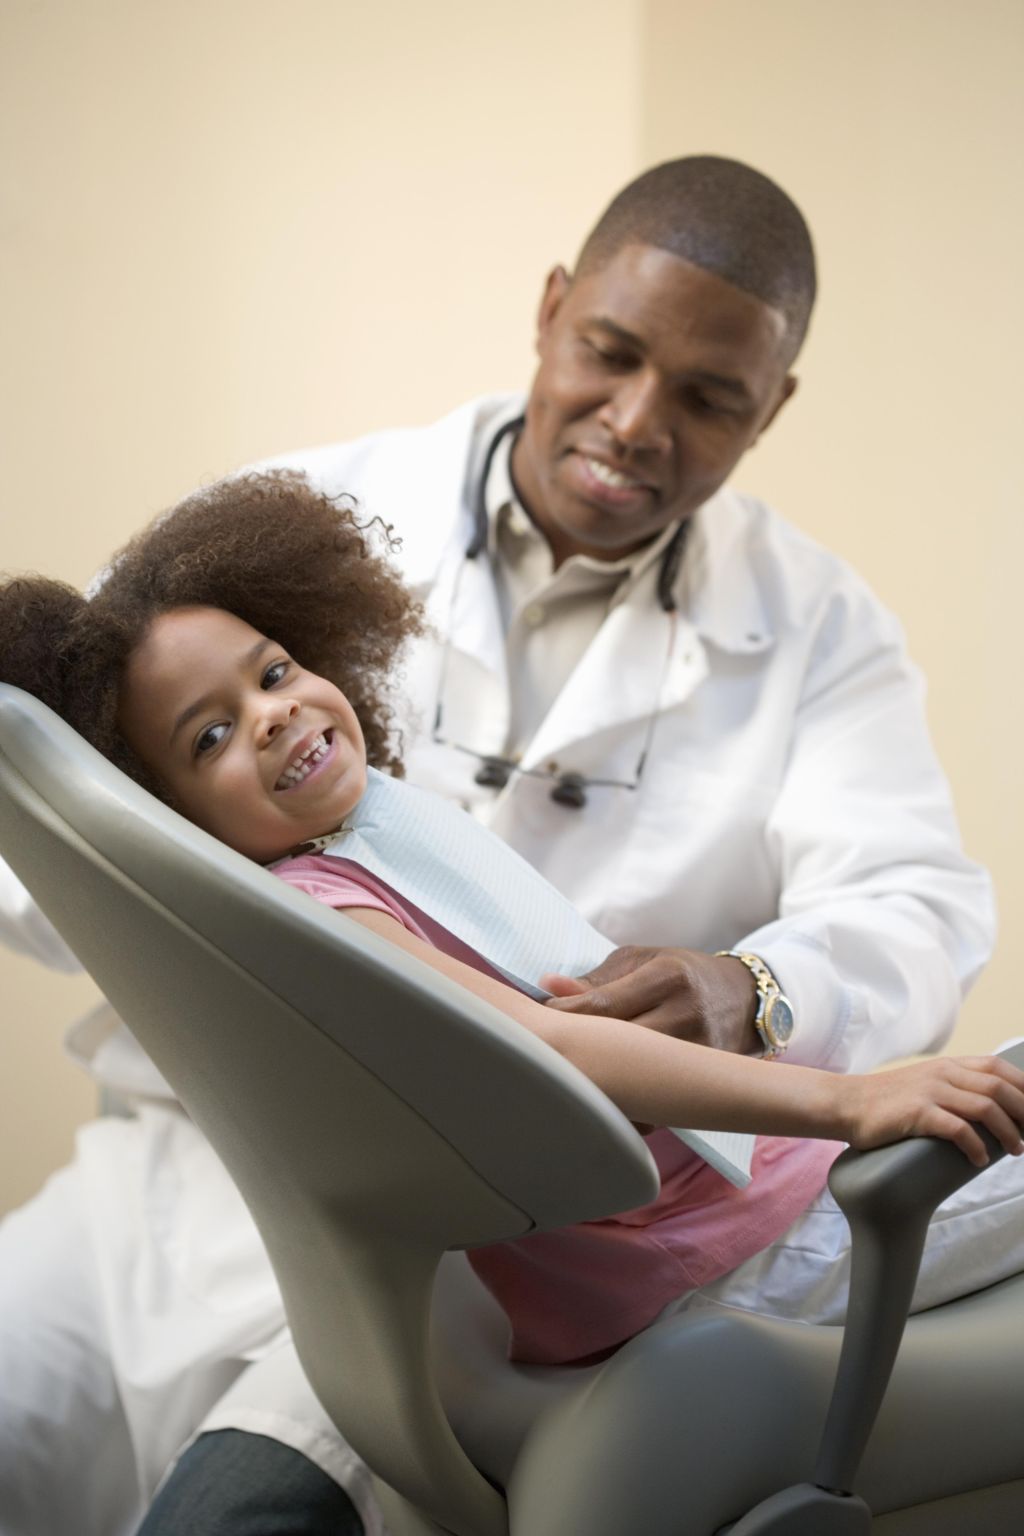 Girl (4-6) sitting in dental chair with dentist